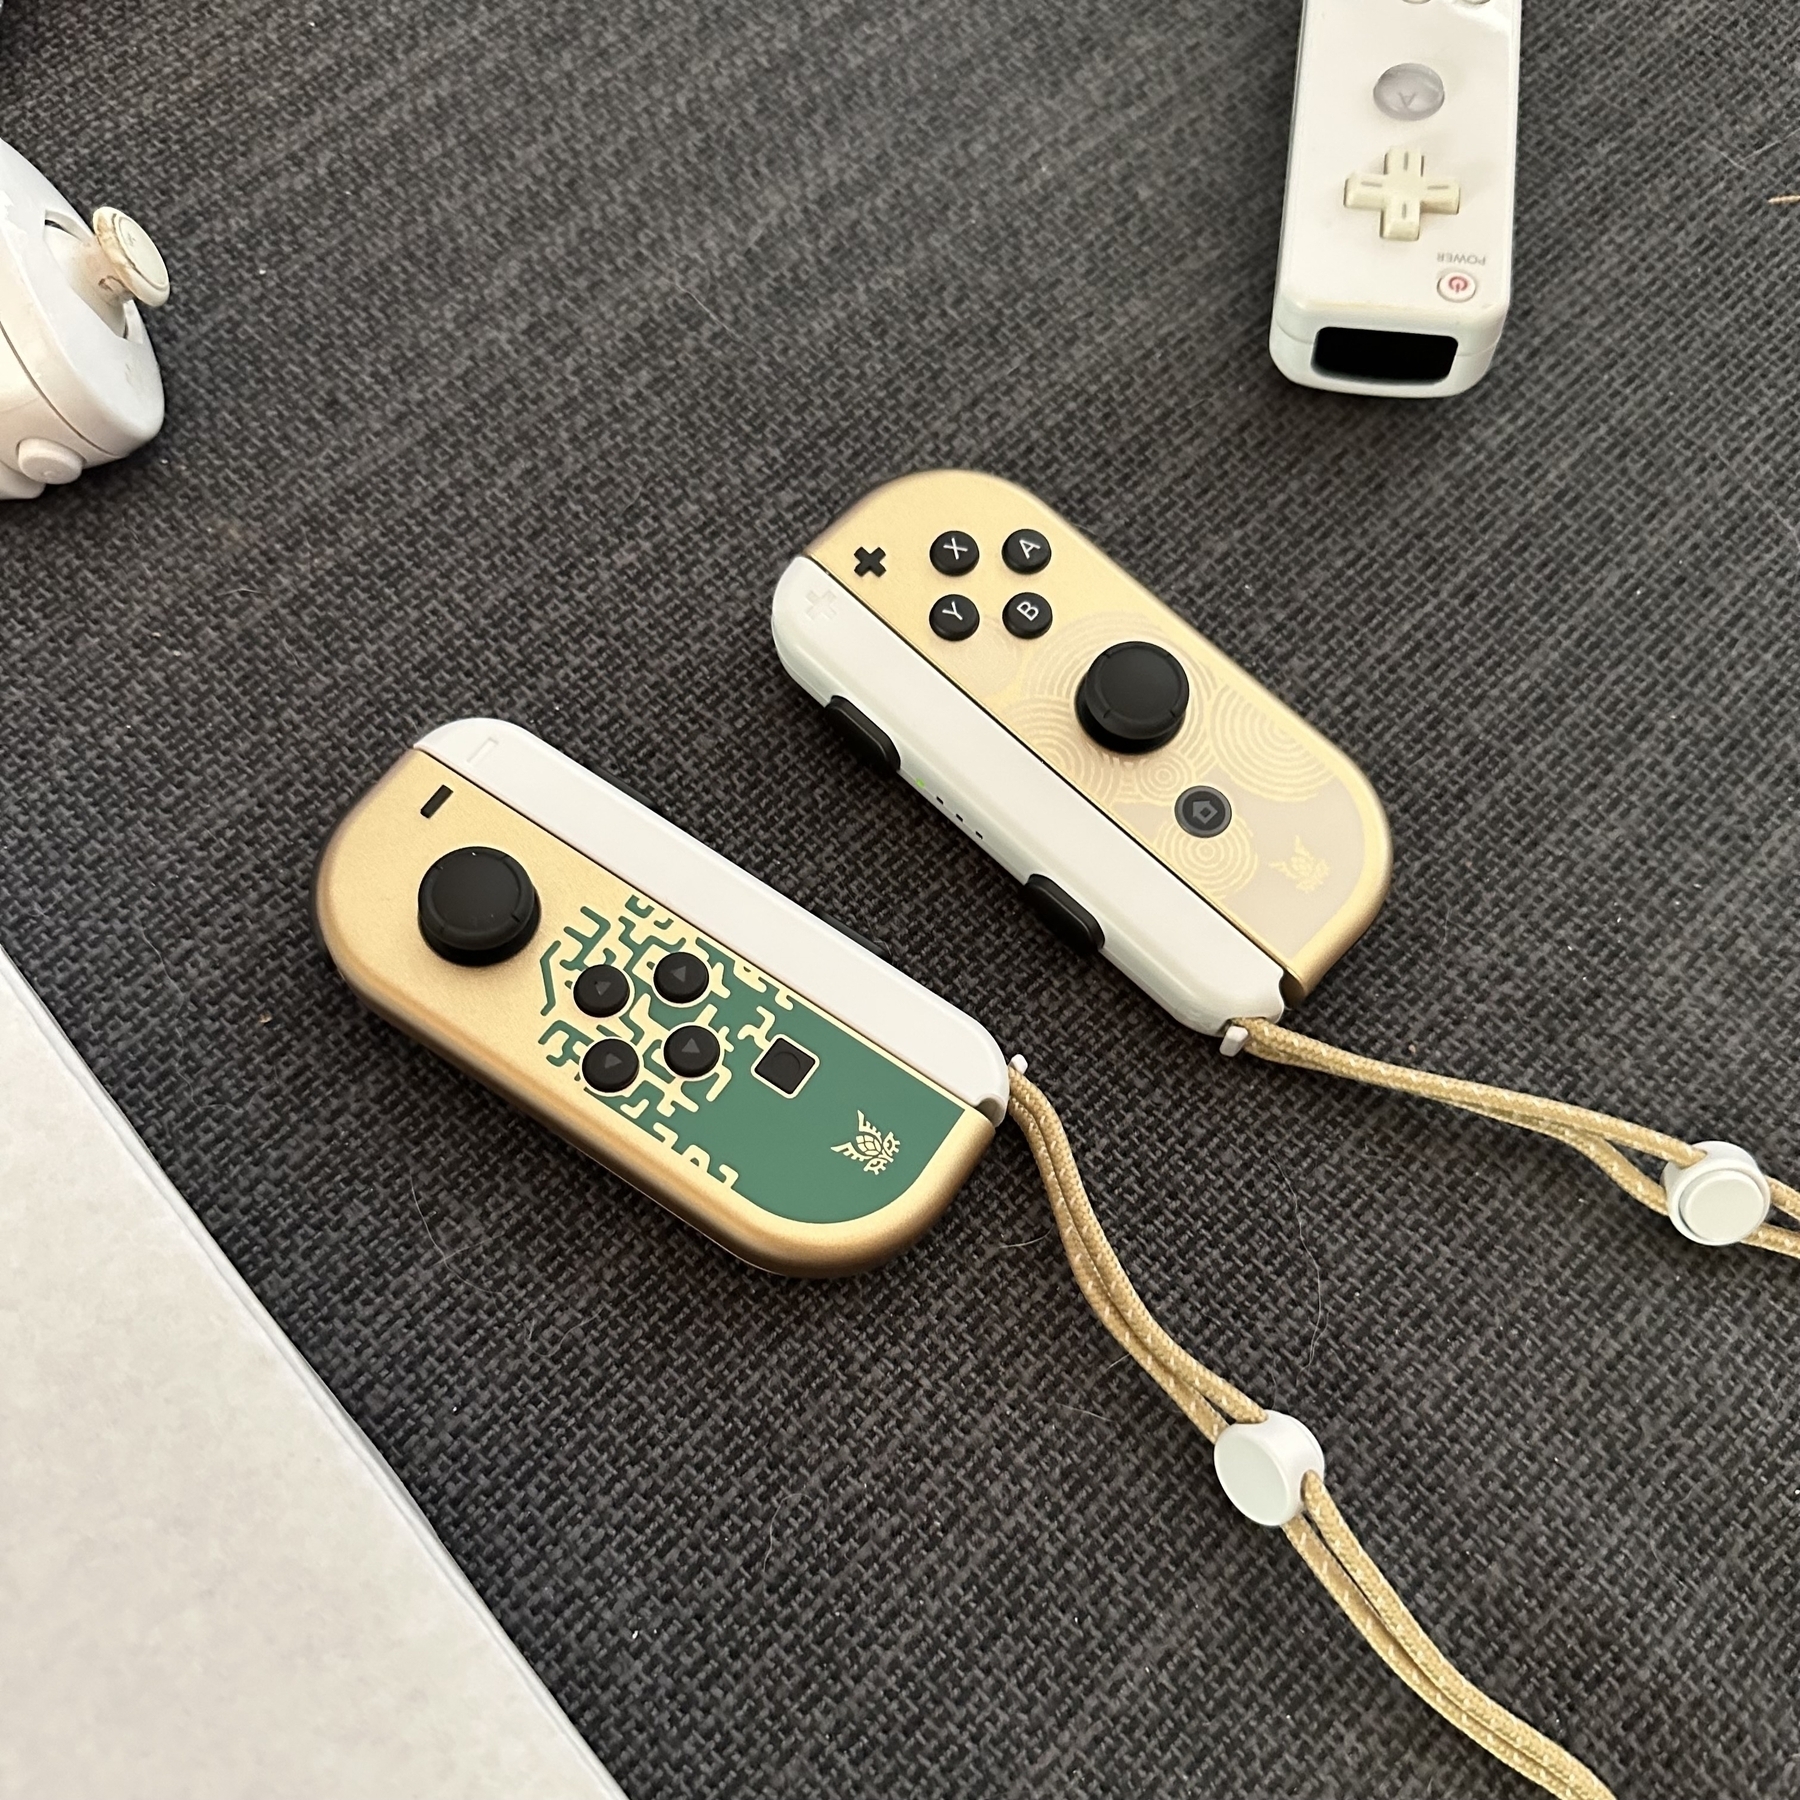 Switch controllers with Zelda-themed pattern and old Wii controller.